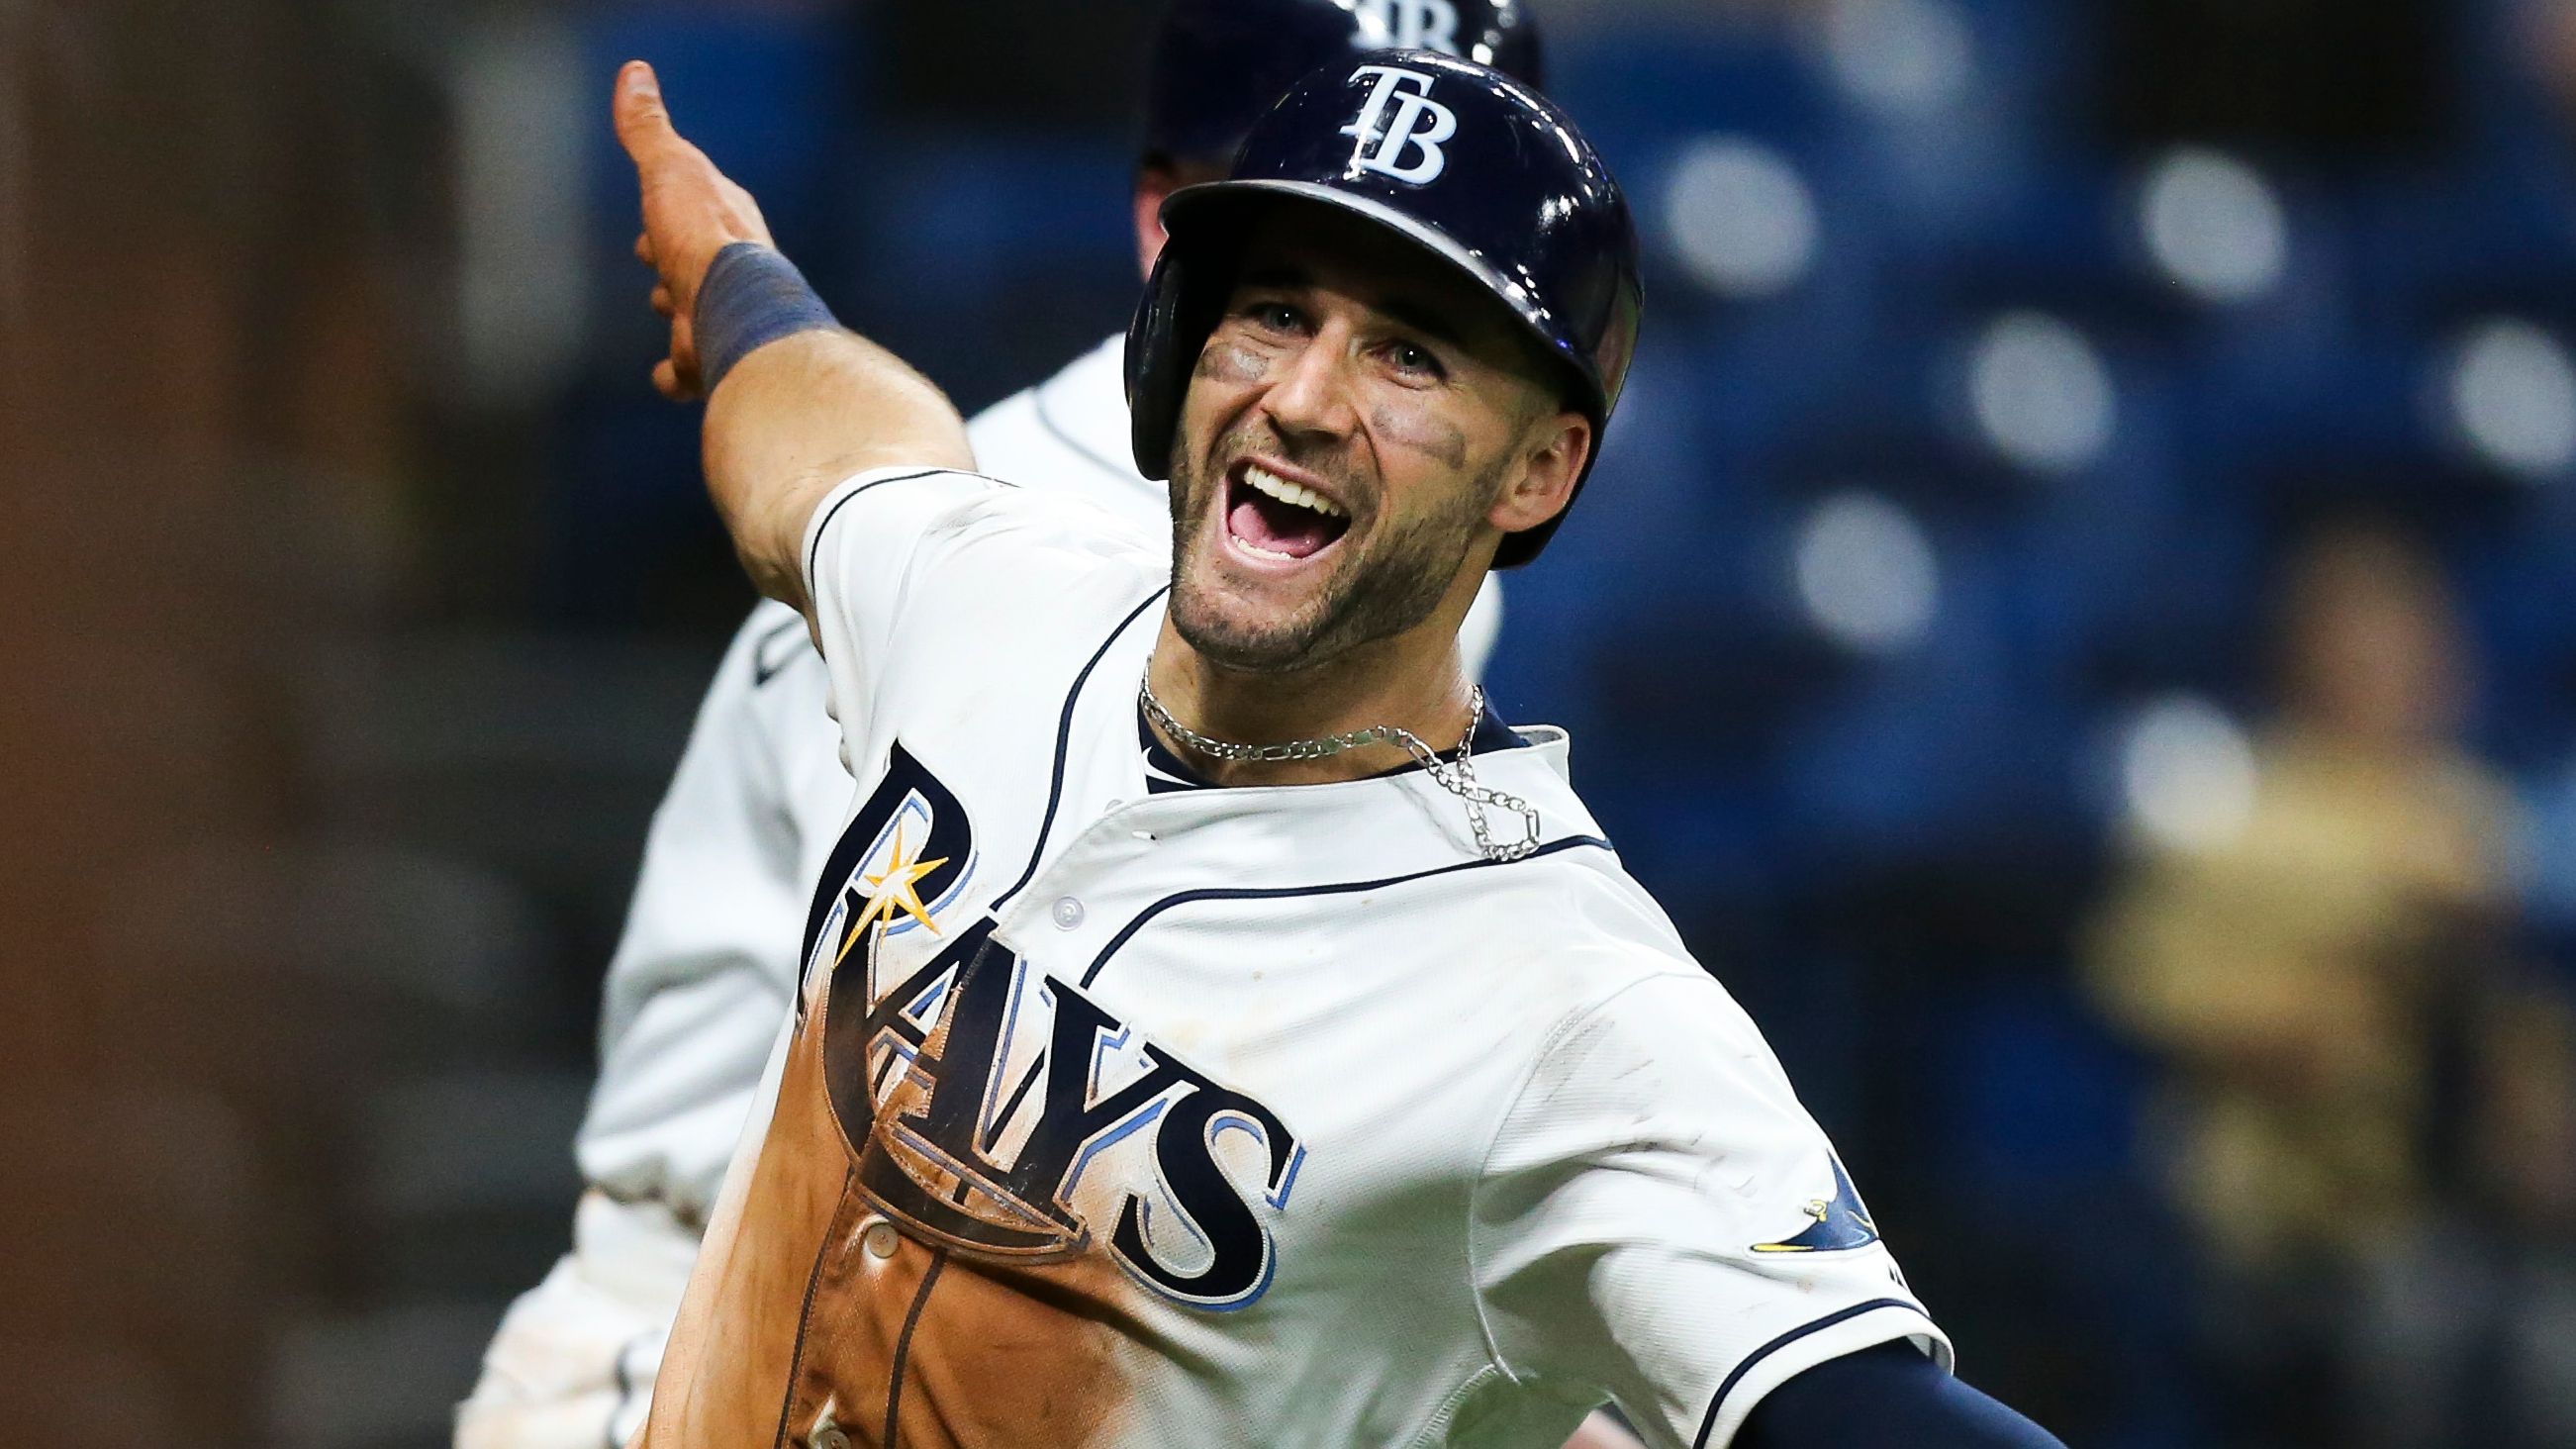 Kevin Kiermaier is the reason to watch Rays baseball in 2018